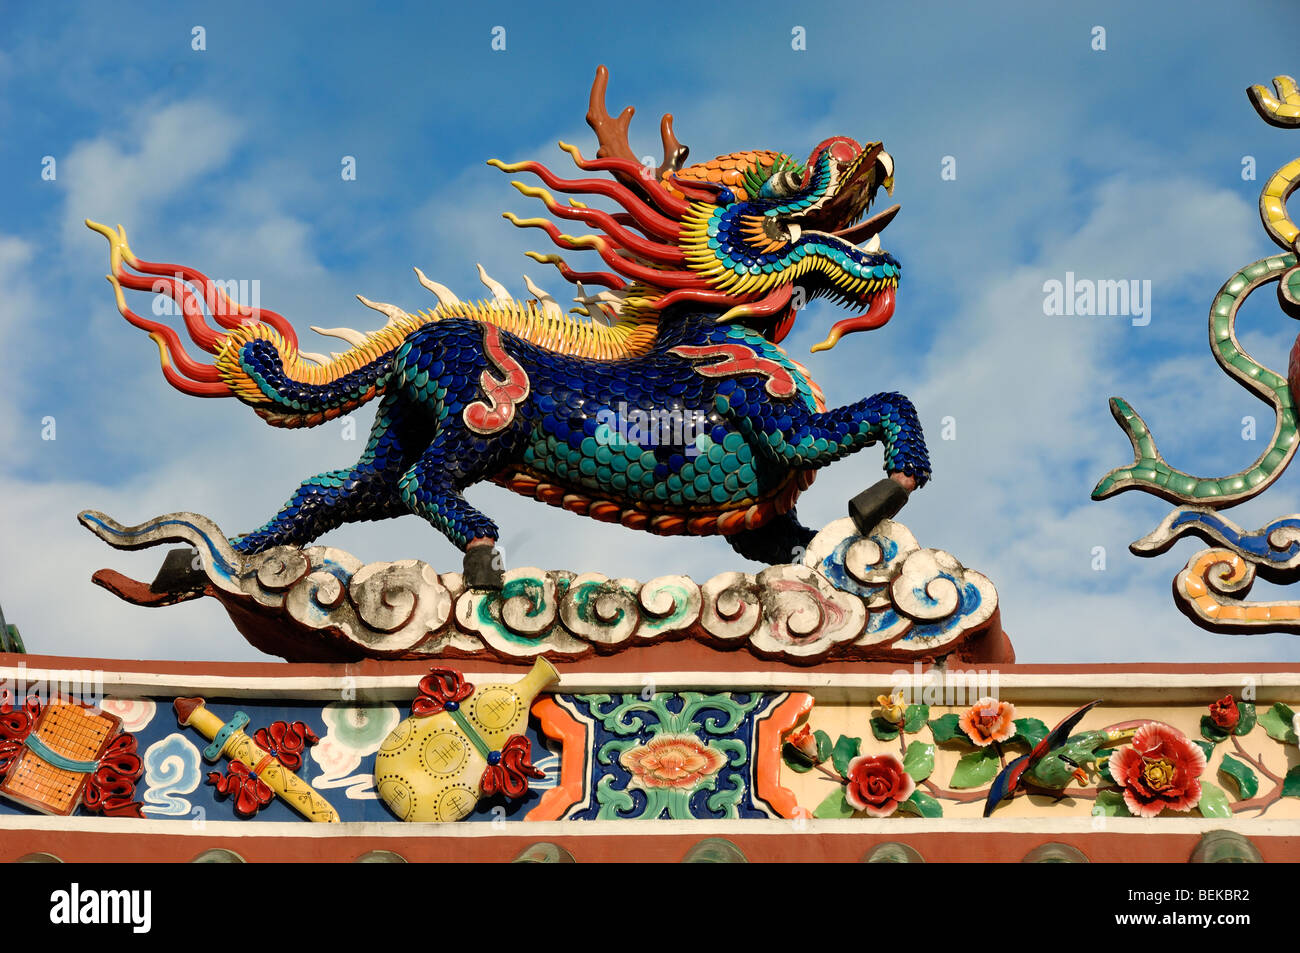 A Ceramic Chinese Dragon on the Roof of the Hong San Chinese Temple in Chinatown Kuching Sarawak Malaysia Borneo Stock Photo